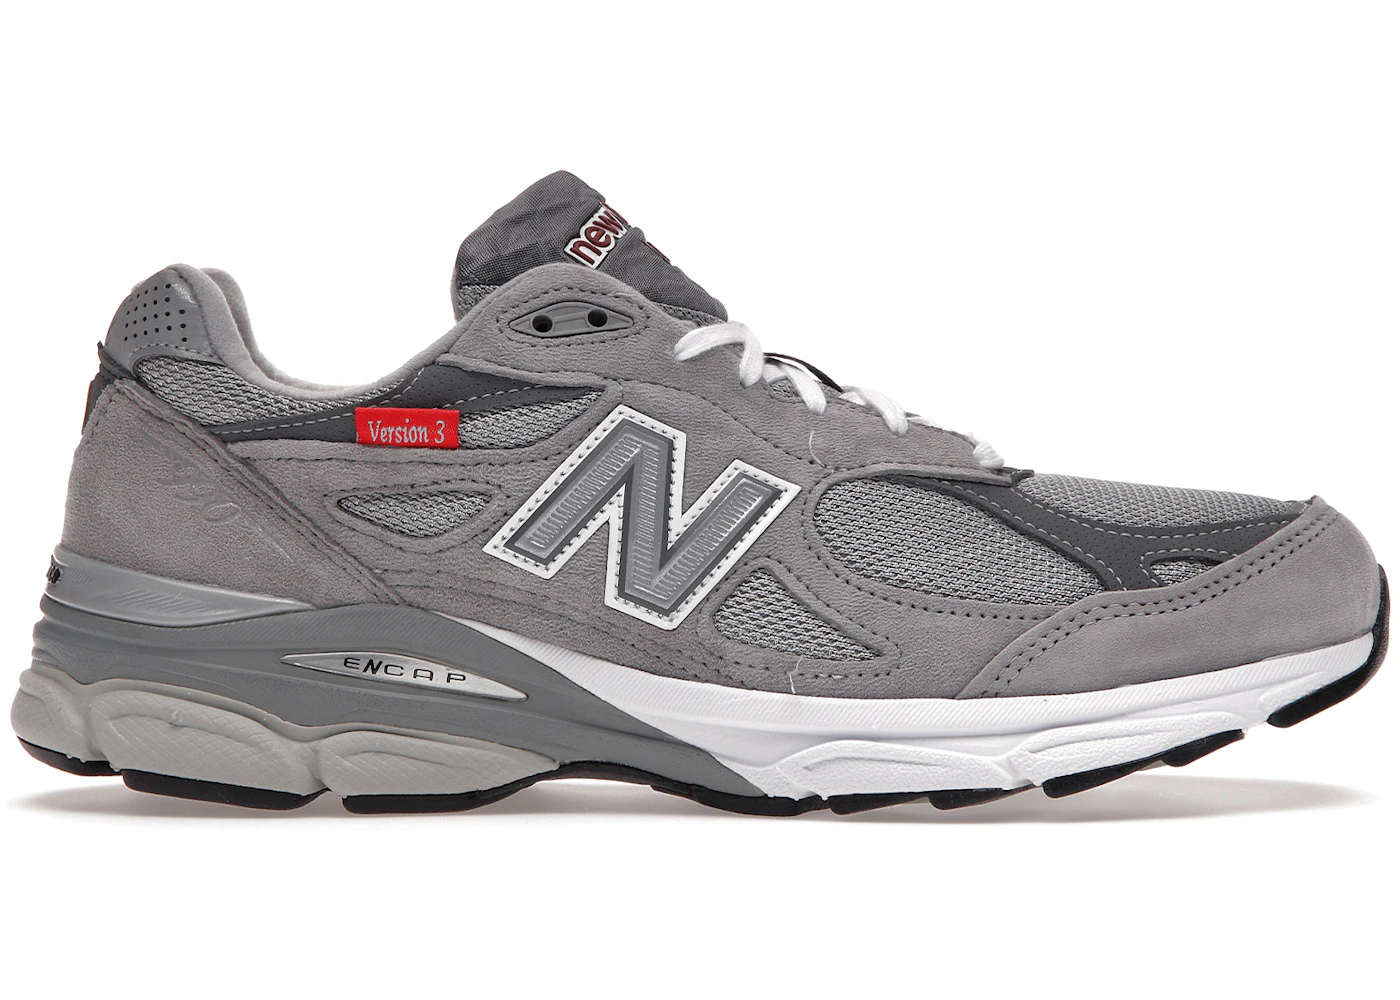 990v3 CORE MADE IN USA SNEAKERS | lupon.gov.ph